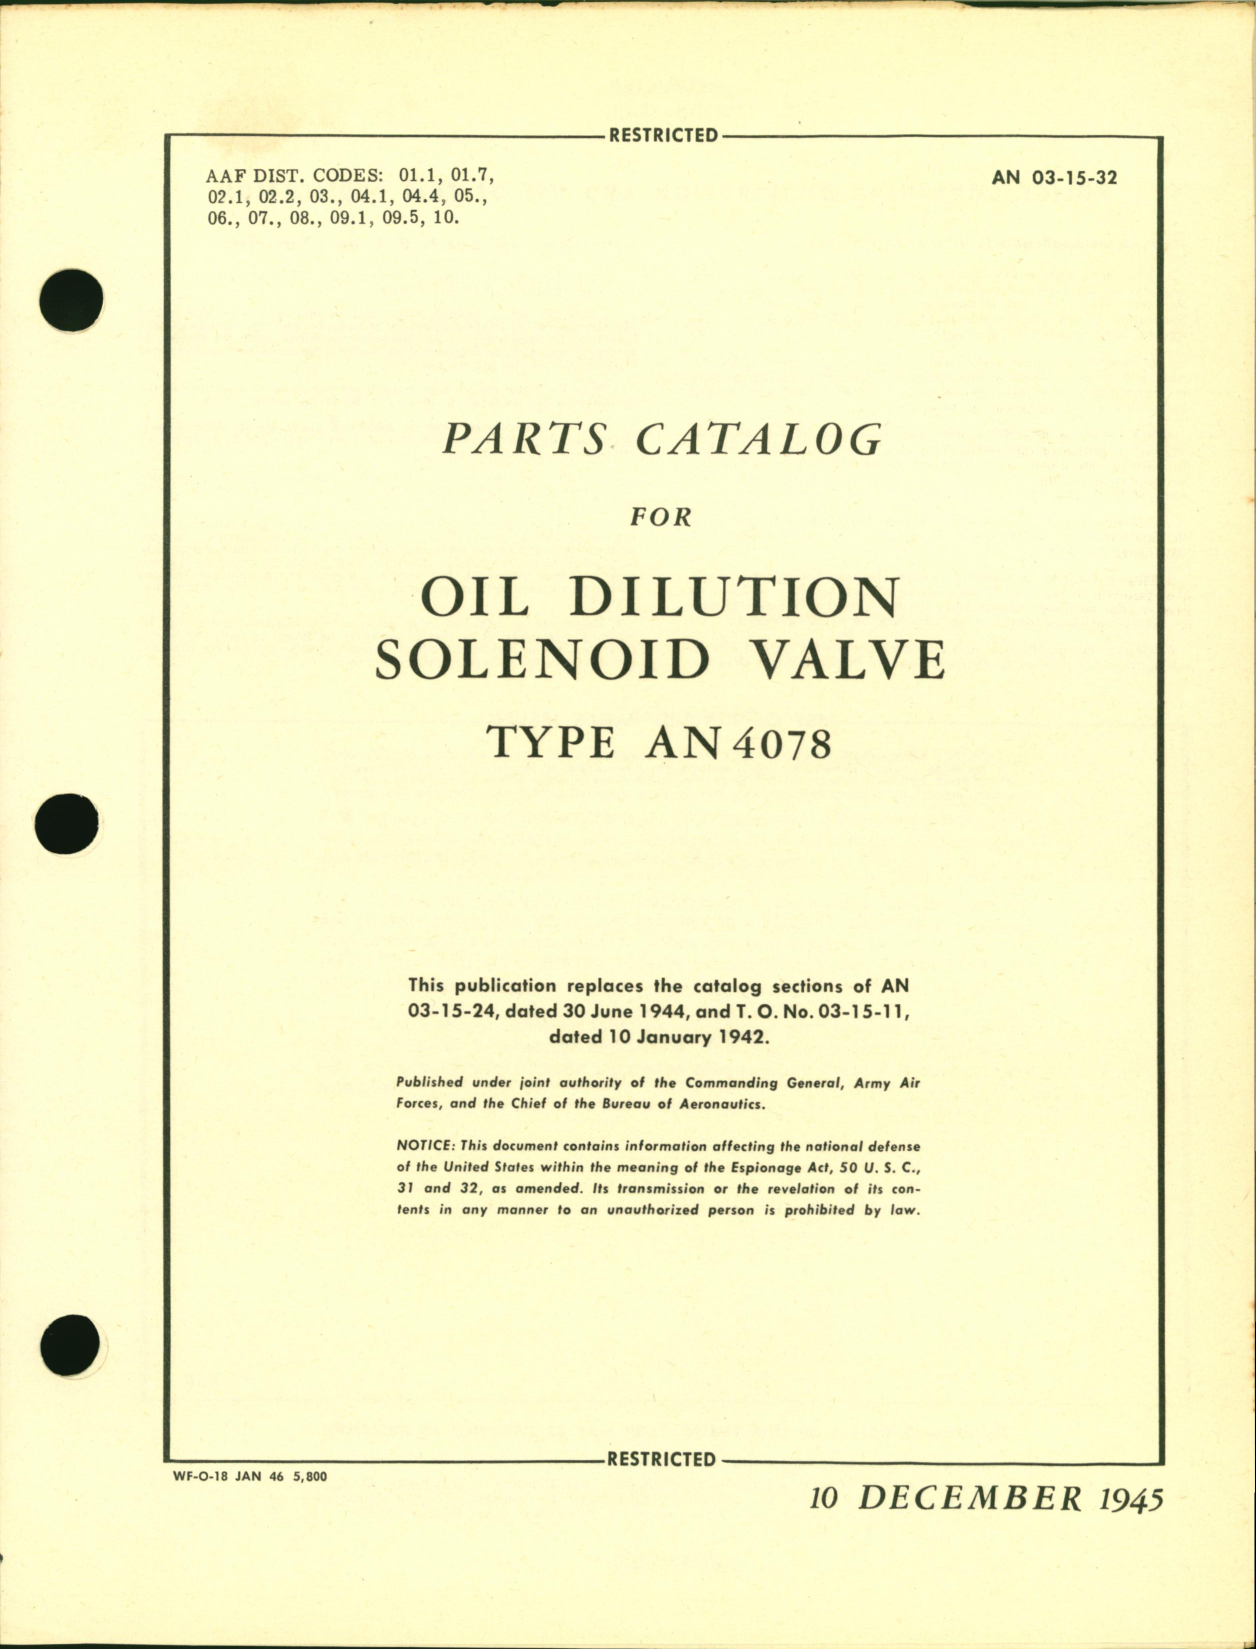 Sample page 1 from AirCorps Library document: Parts Catalog for Oil Dilution Solenoid Valve Type AN 4078